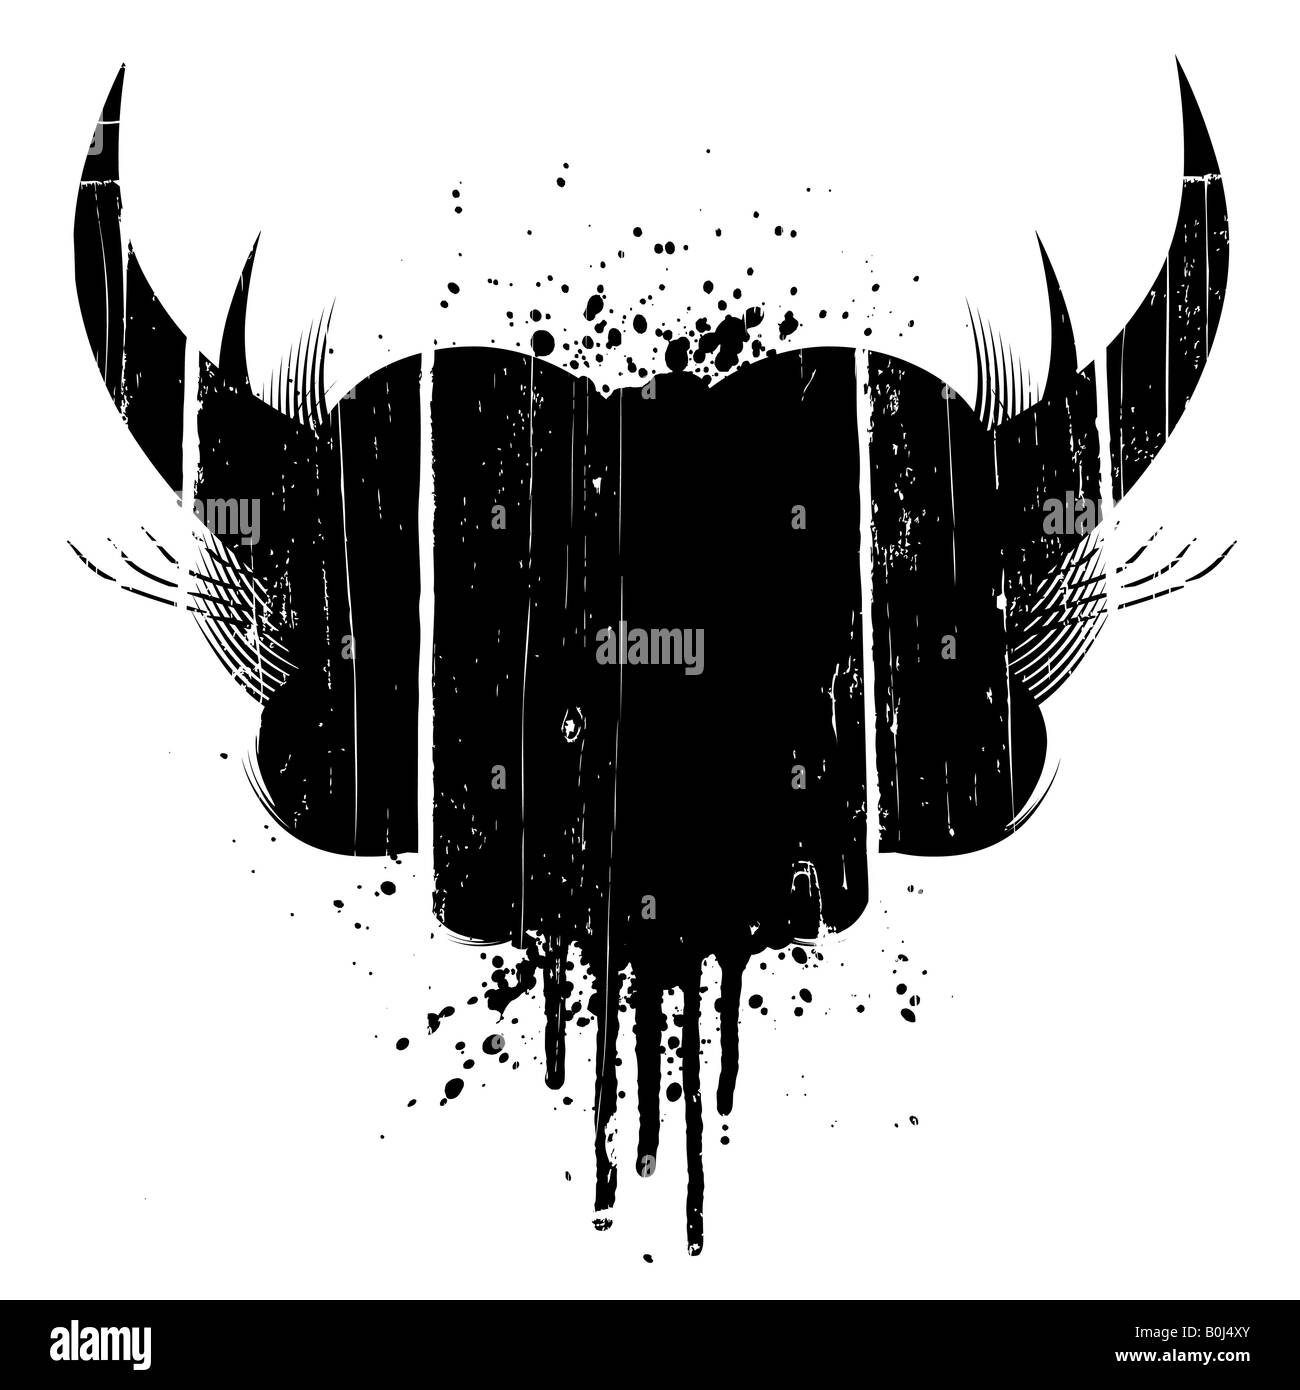 Vector illustration of a grungy aged design element with horns and ink splatter Stock Photo